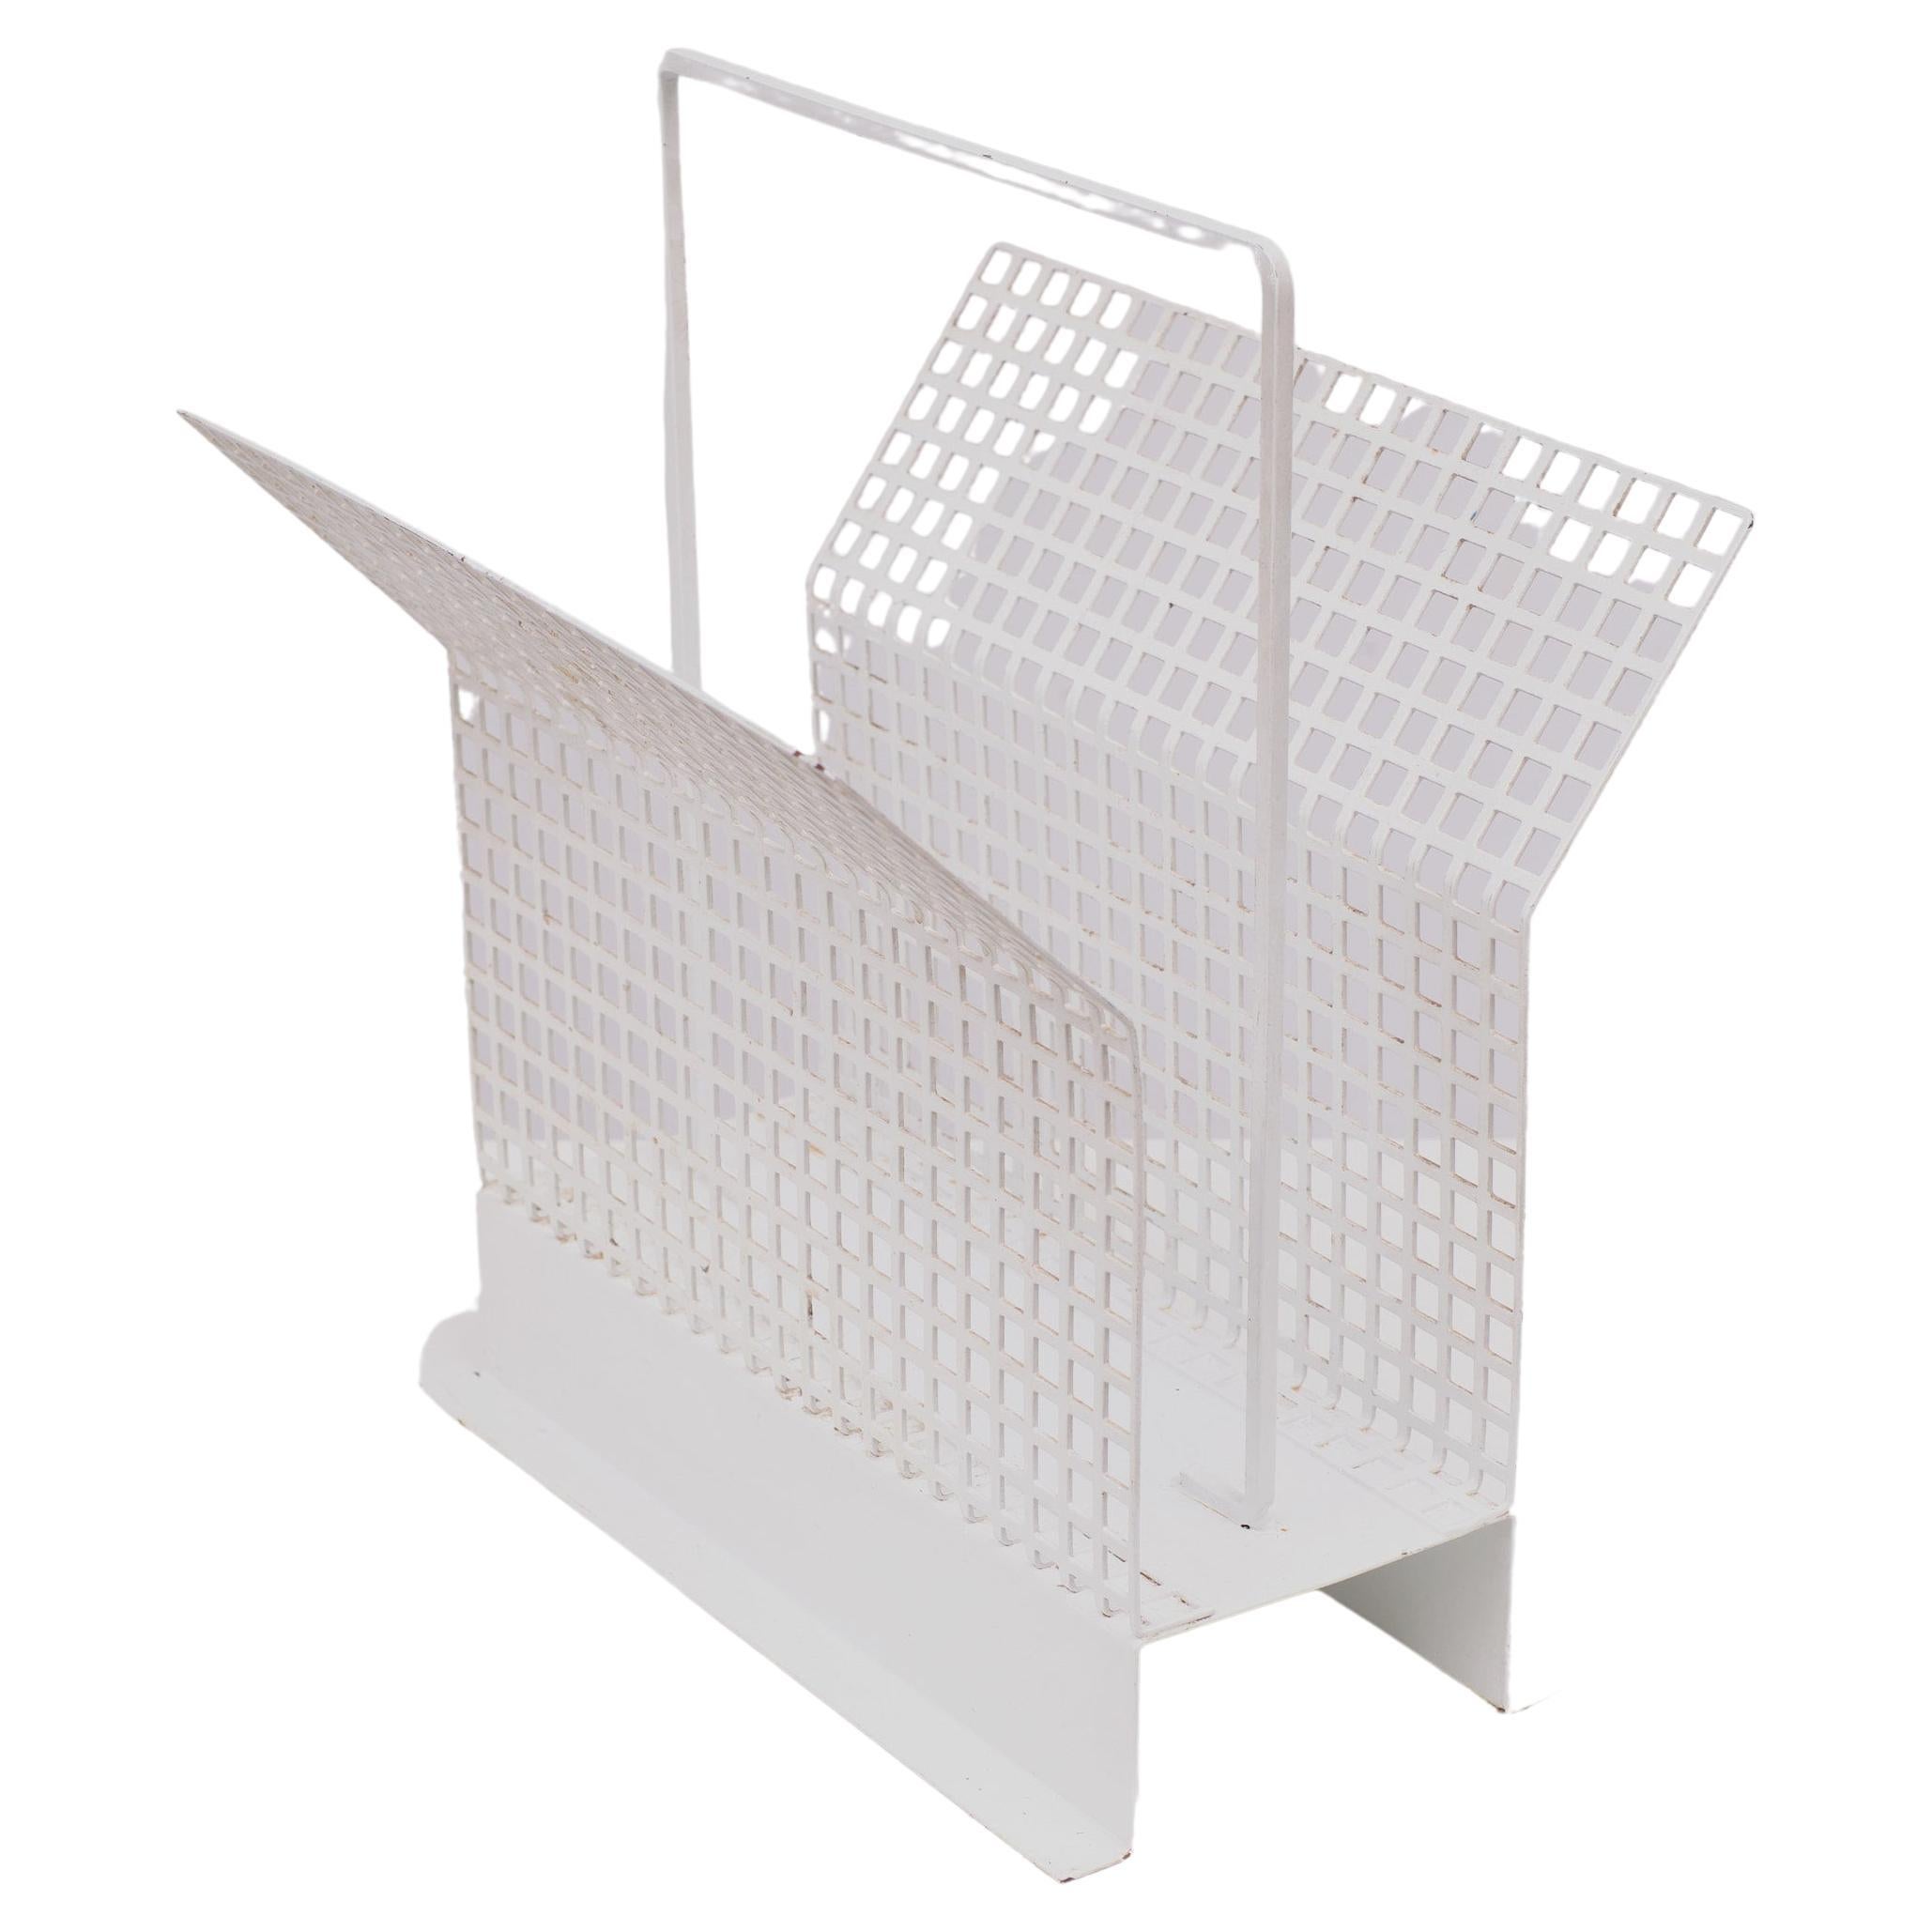 Perforated Metal News Paper Rack, 1960s, France In Good Condition For Sale In Den Haag, NL